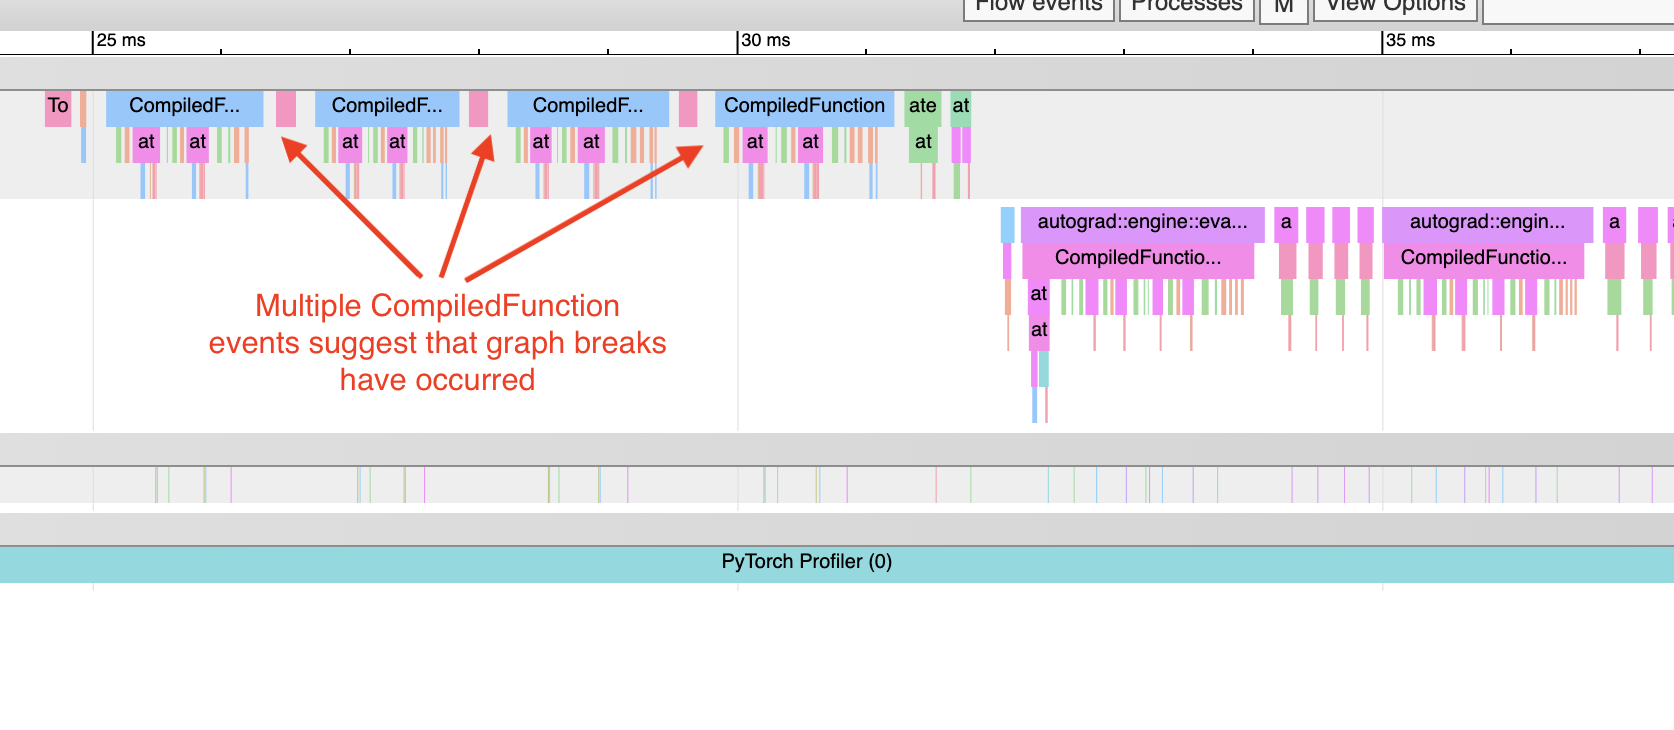 Visualization in the chrome://trace viewer, showing multiple CompiledFunction events - indicating graph breaks.